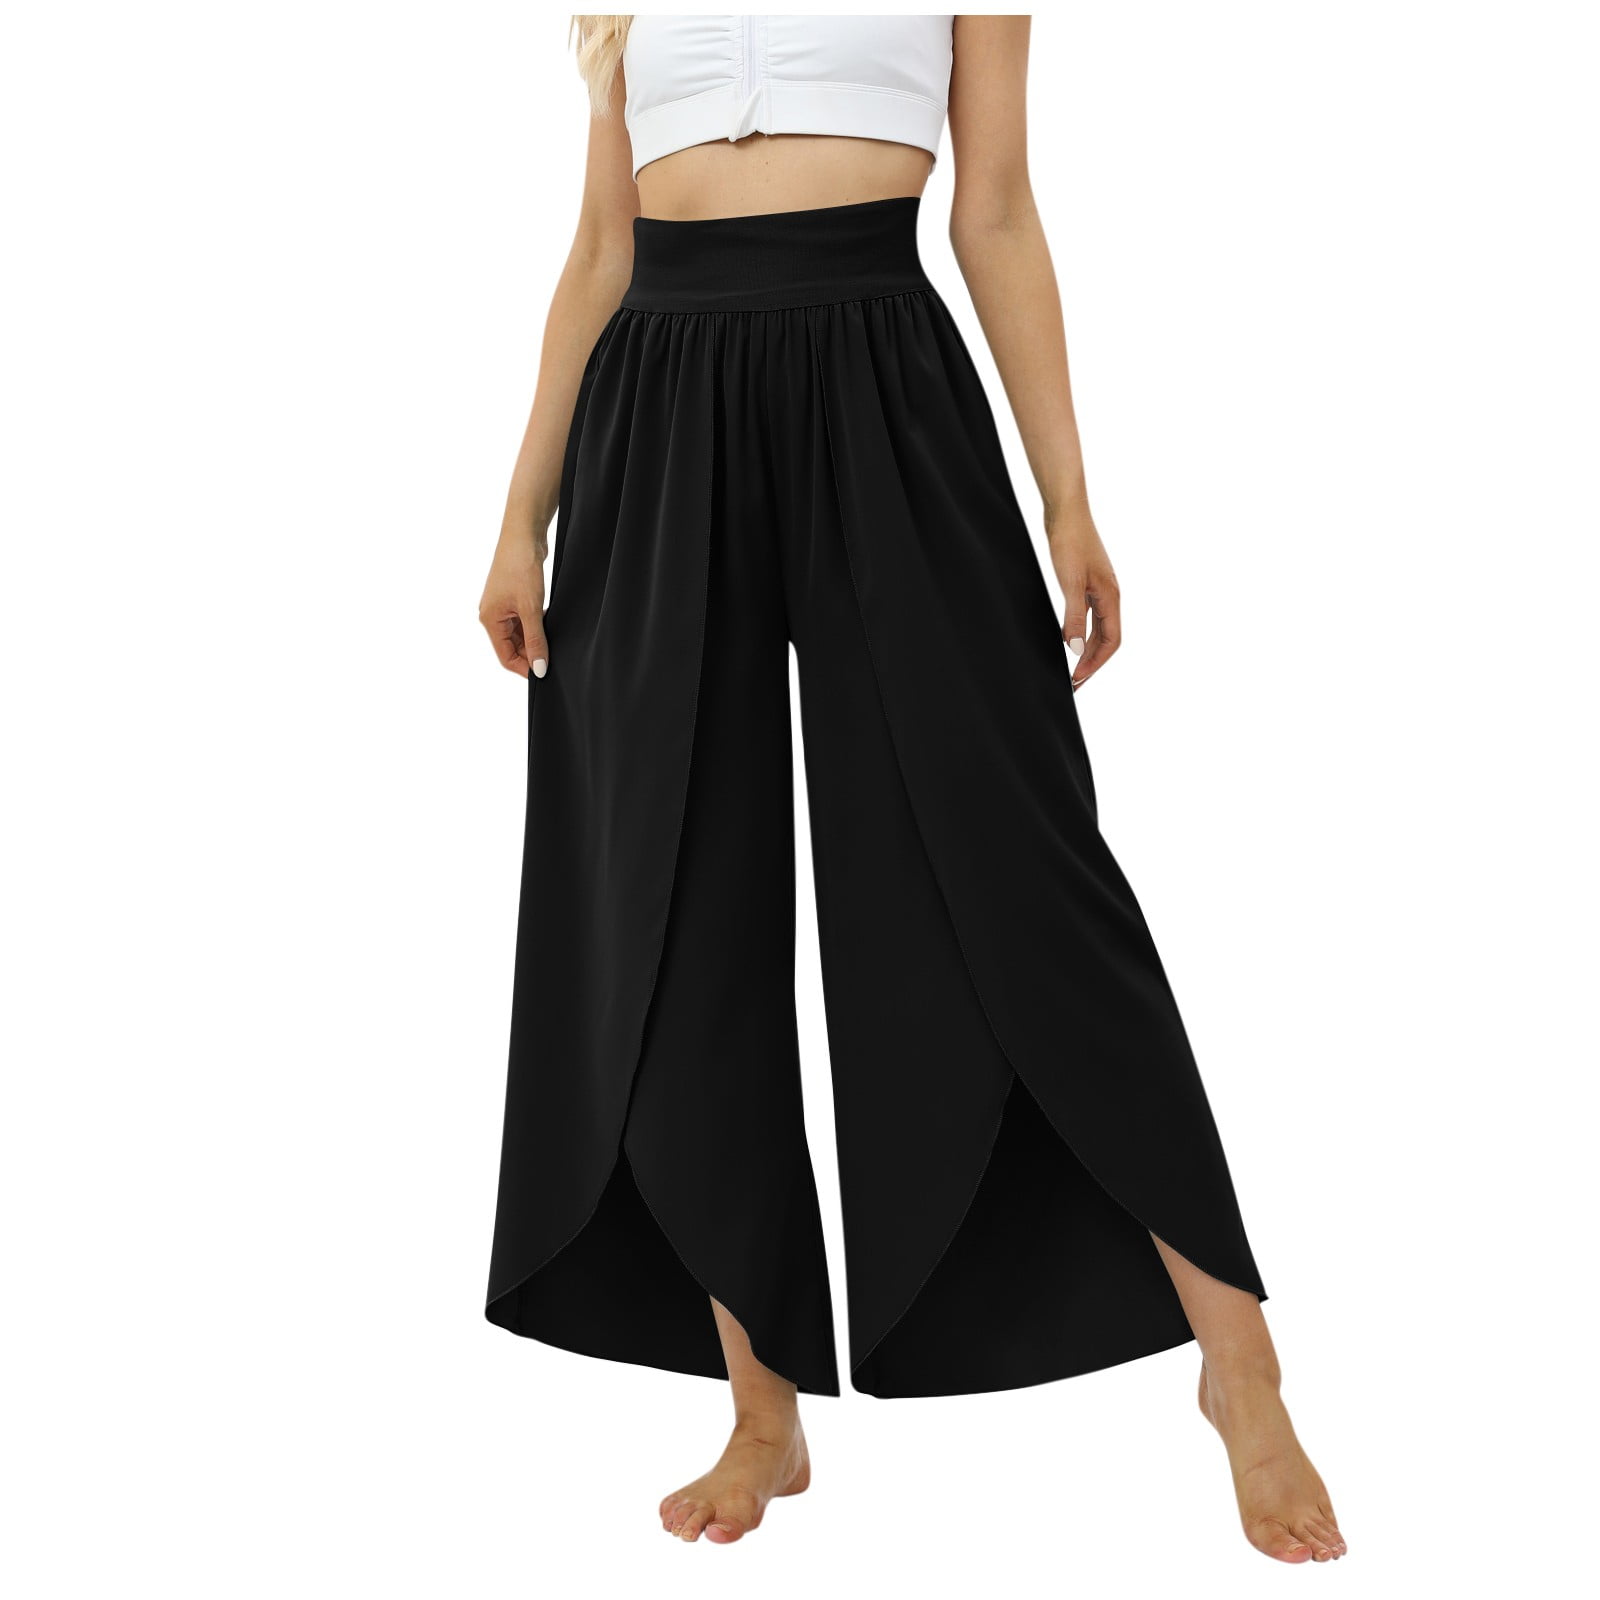  WALKFB Women's Wide Leg Yoga Pants High Waisted Drawstring  Palazzo Pants Plus Size Comfy Loose Casual Lounge Pants Black : Clothing,  Shoes & Jewelry